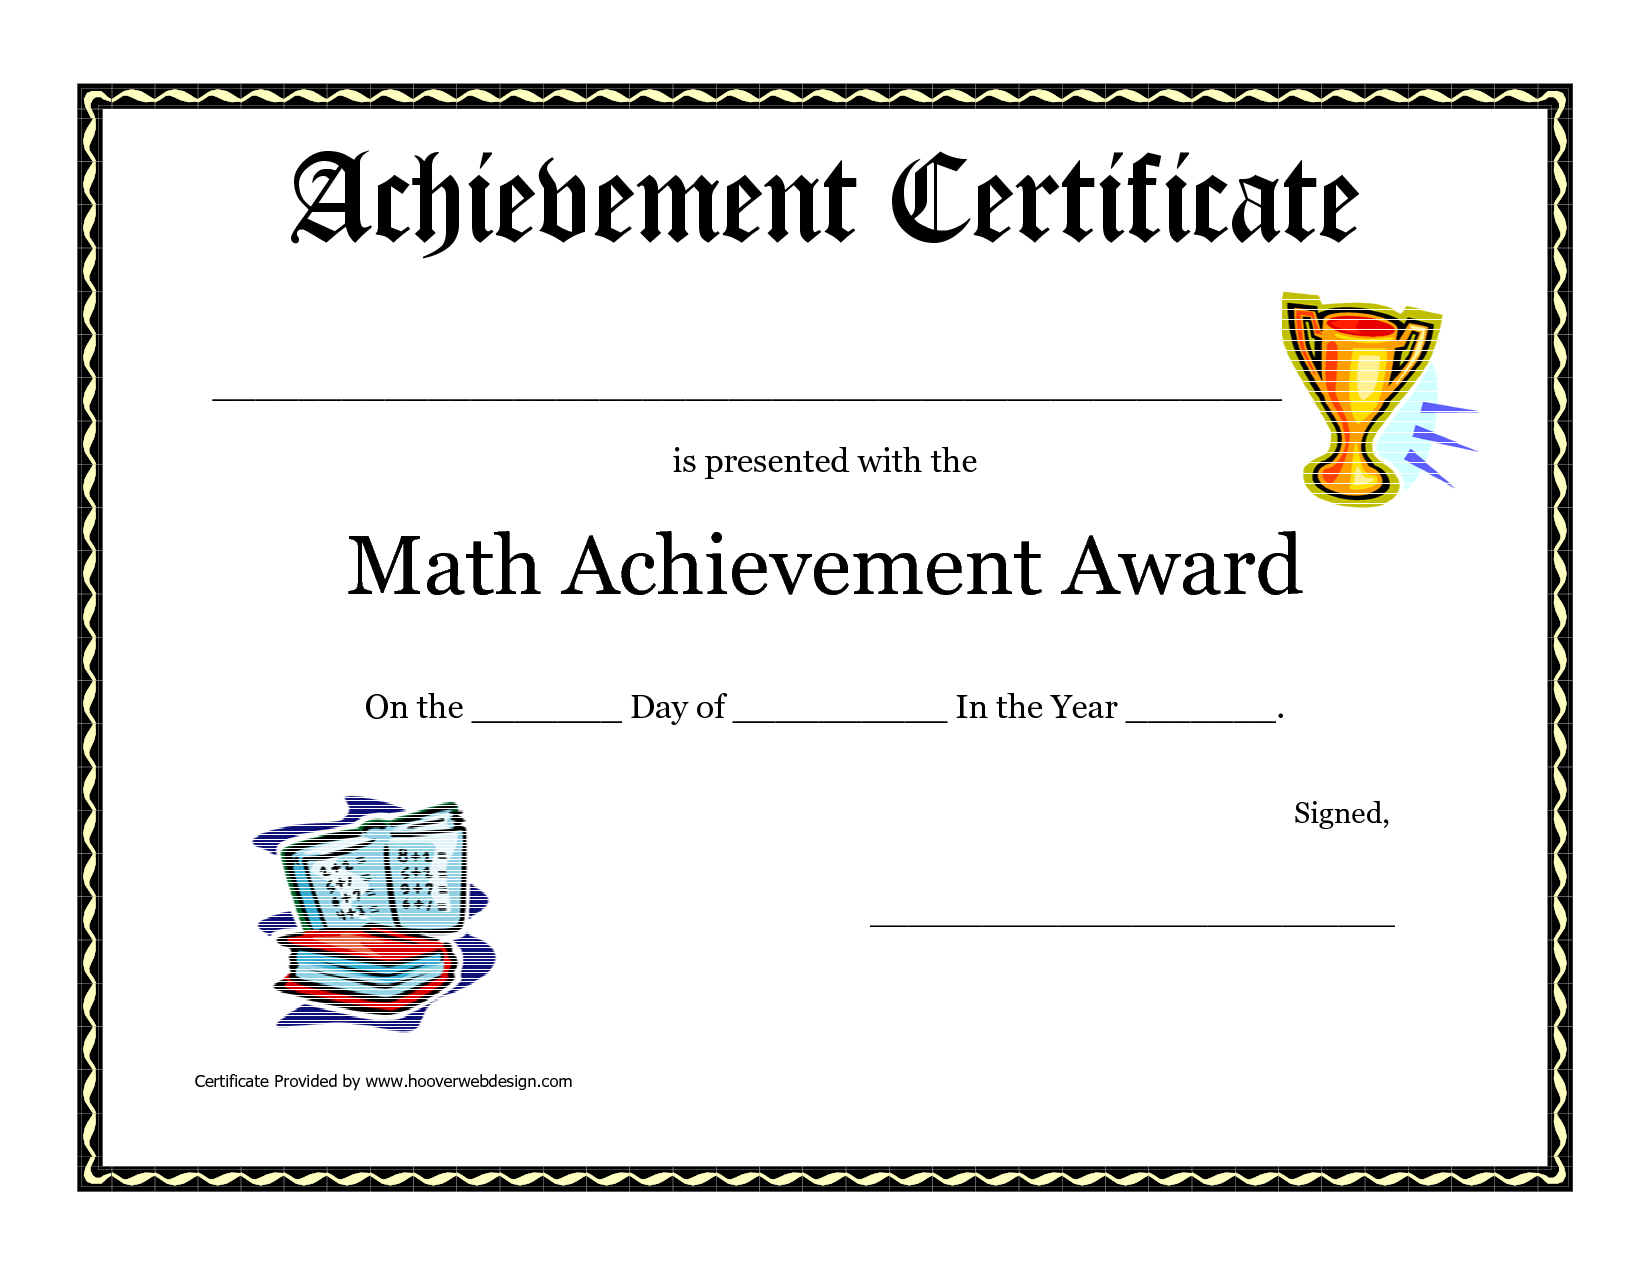 Math Achievement Award Printable Certificate Pdf | Math Throughout Hayes Certificate Templates